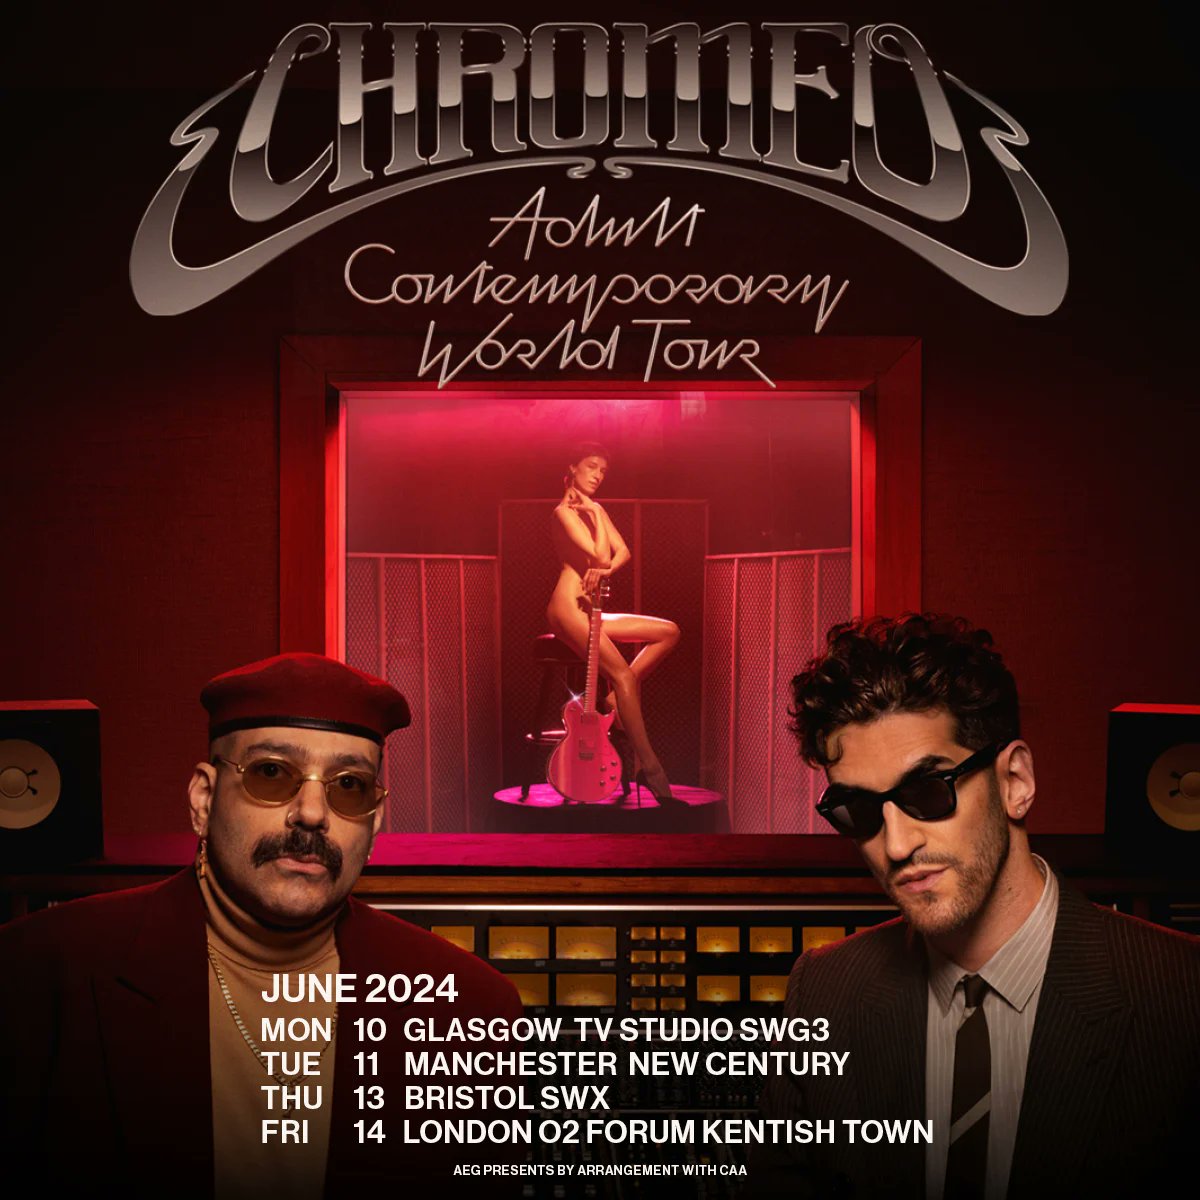 Billets Chromeo - Adult Contemporary World Tour (Manchester New Century Hall - Manchester)